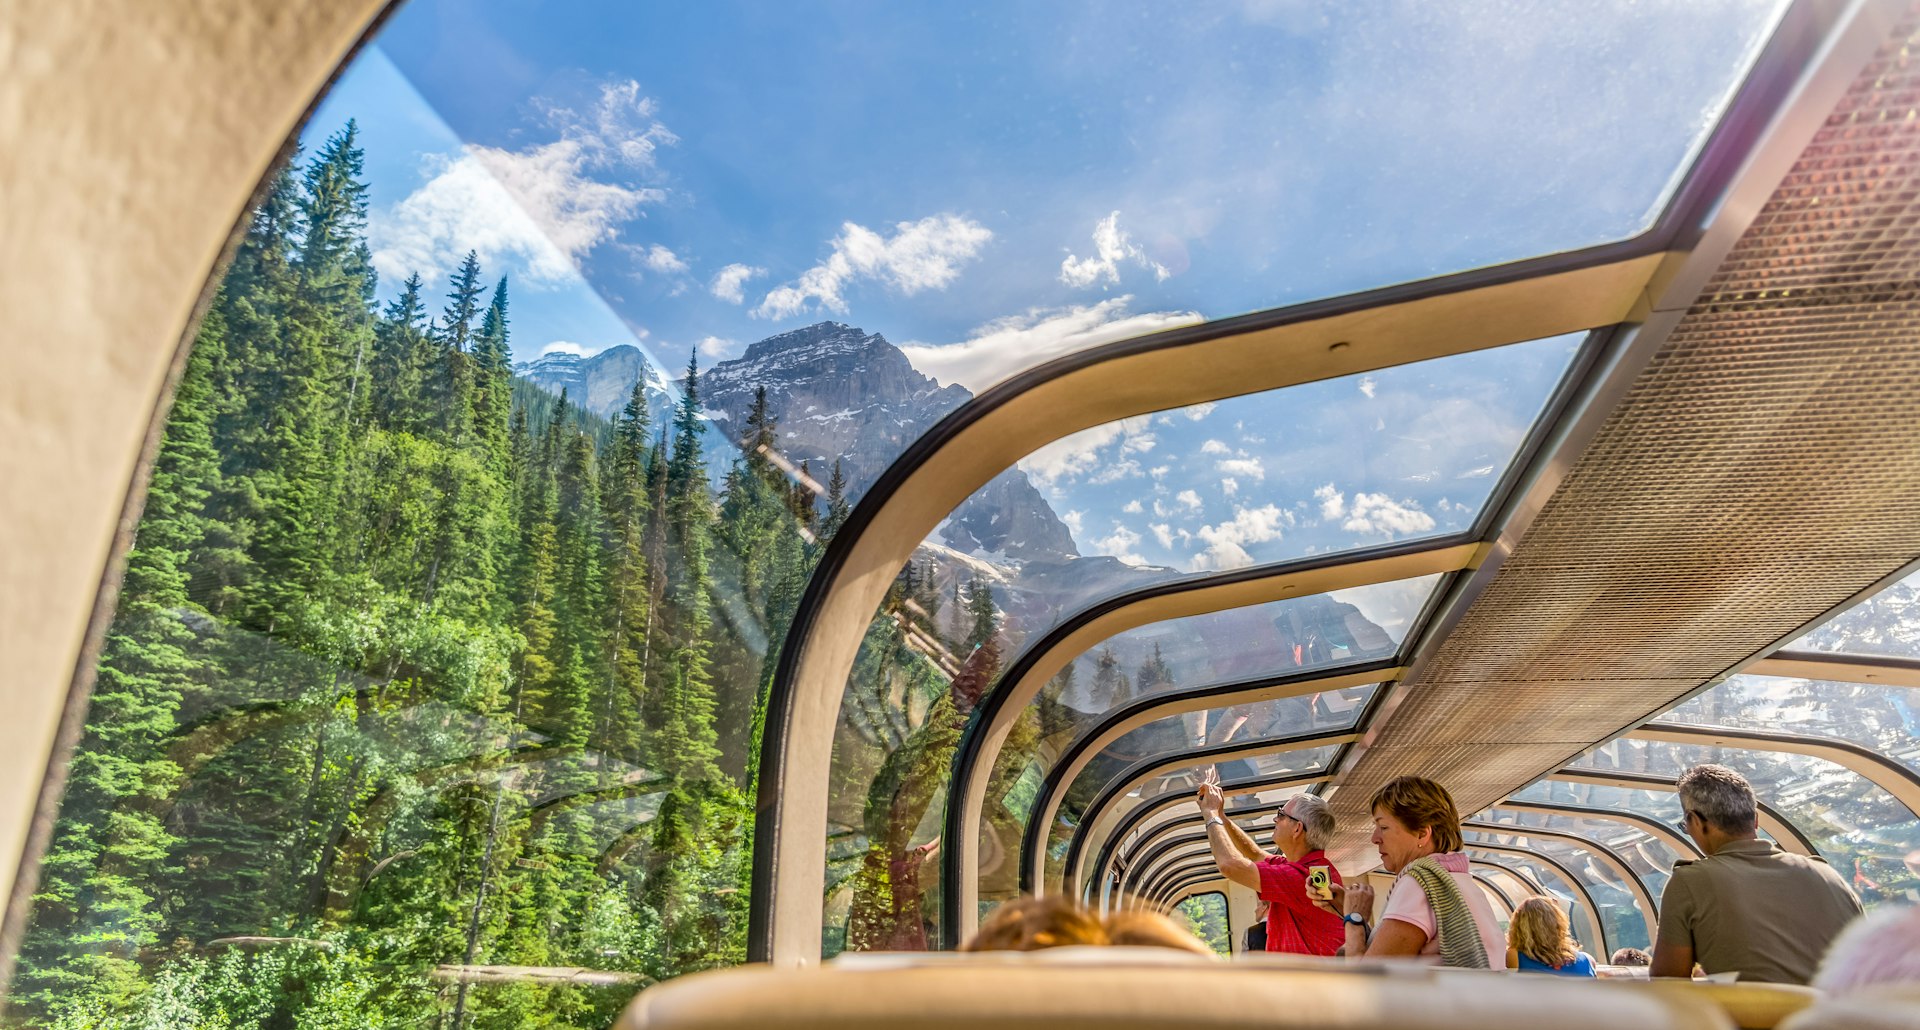 People sit in the observation desk of a train looking out at the Rocky Mountains. 